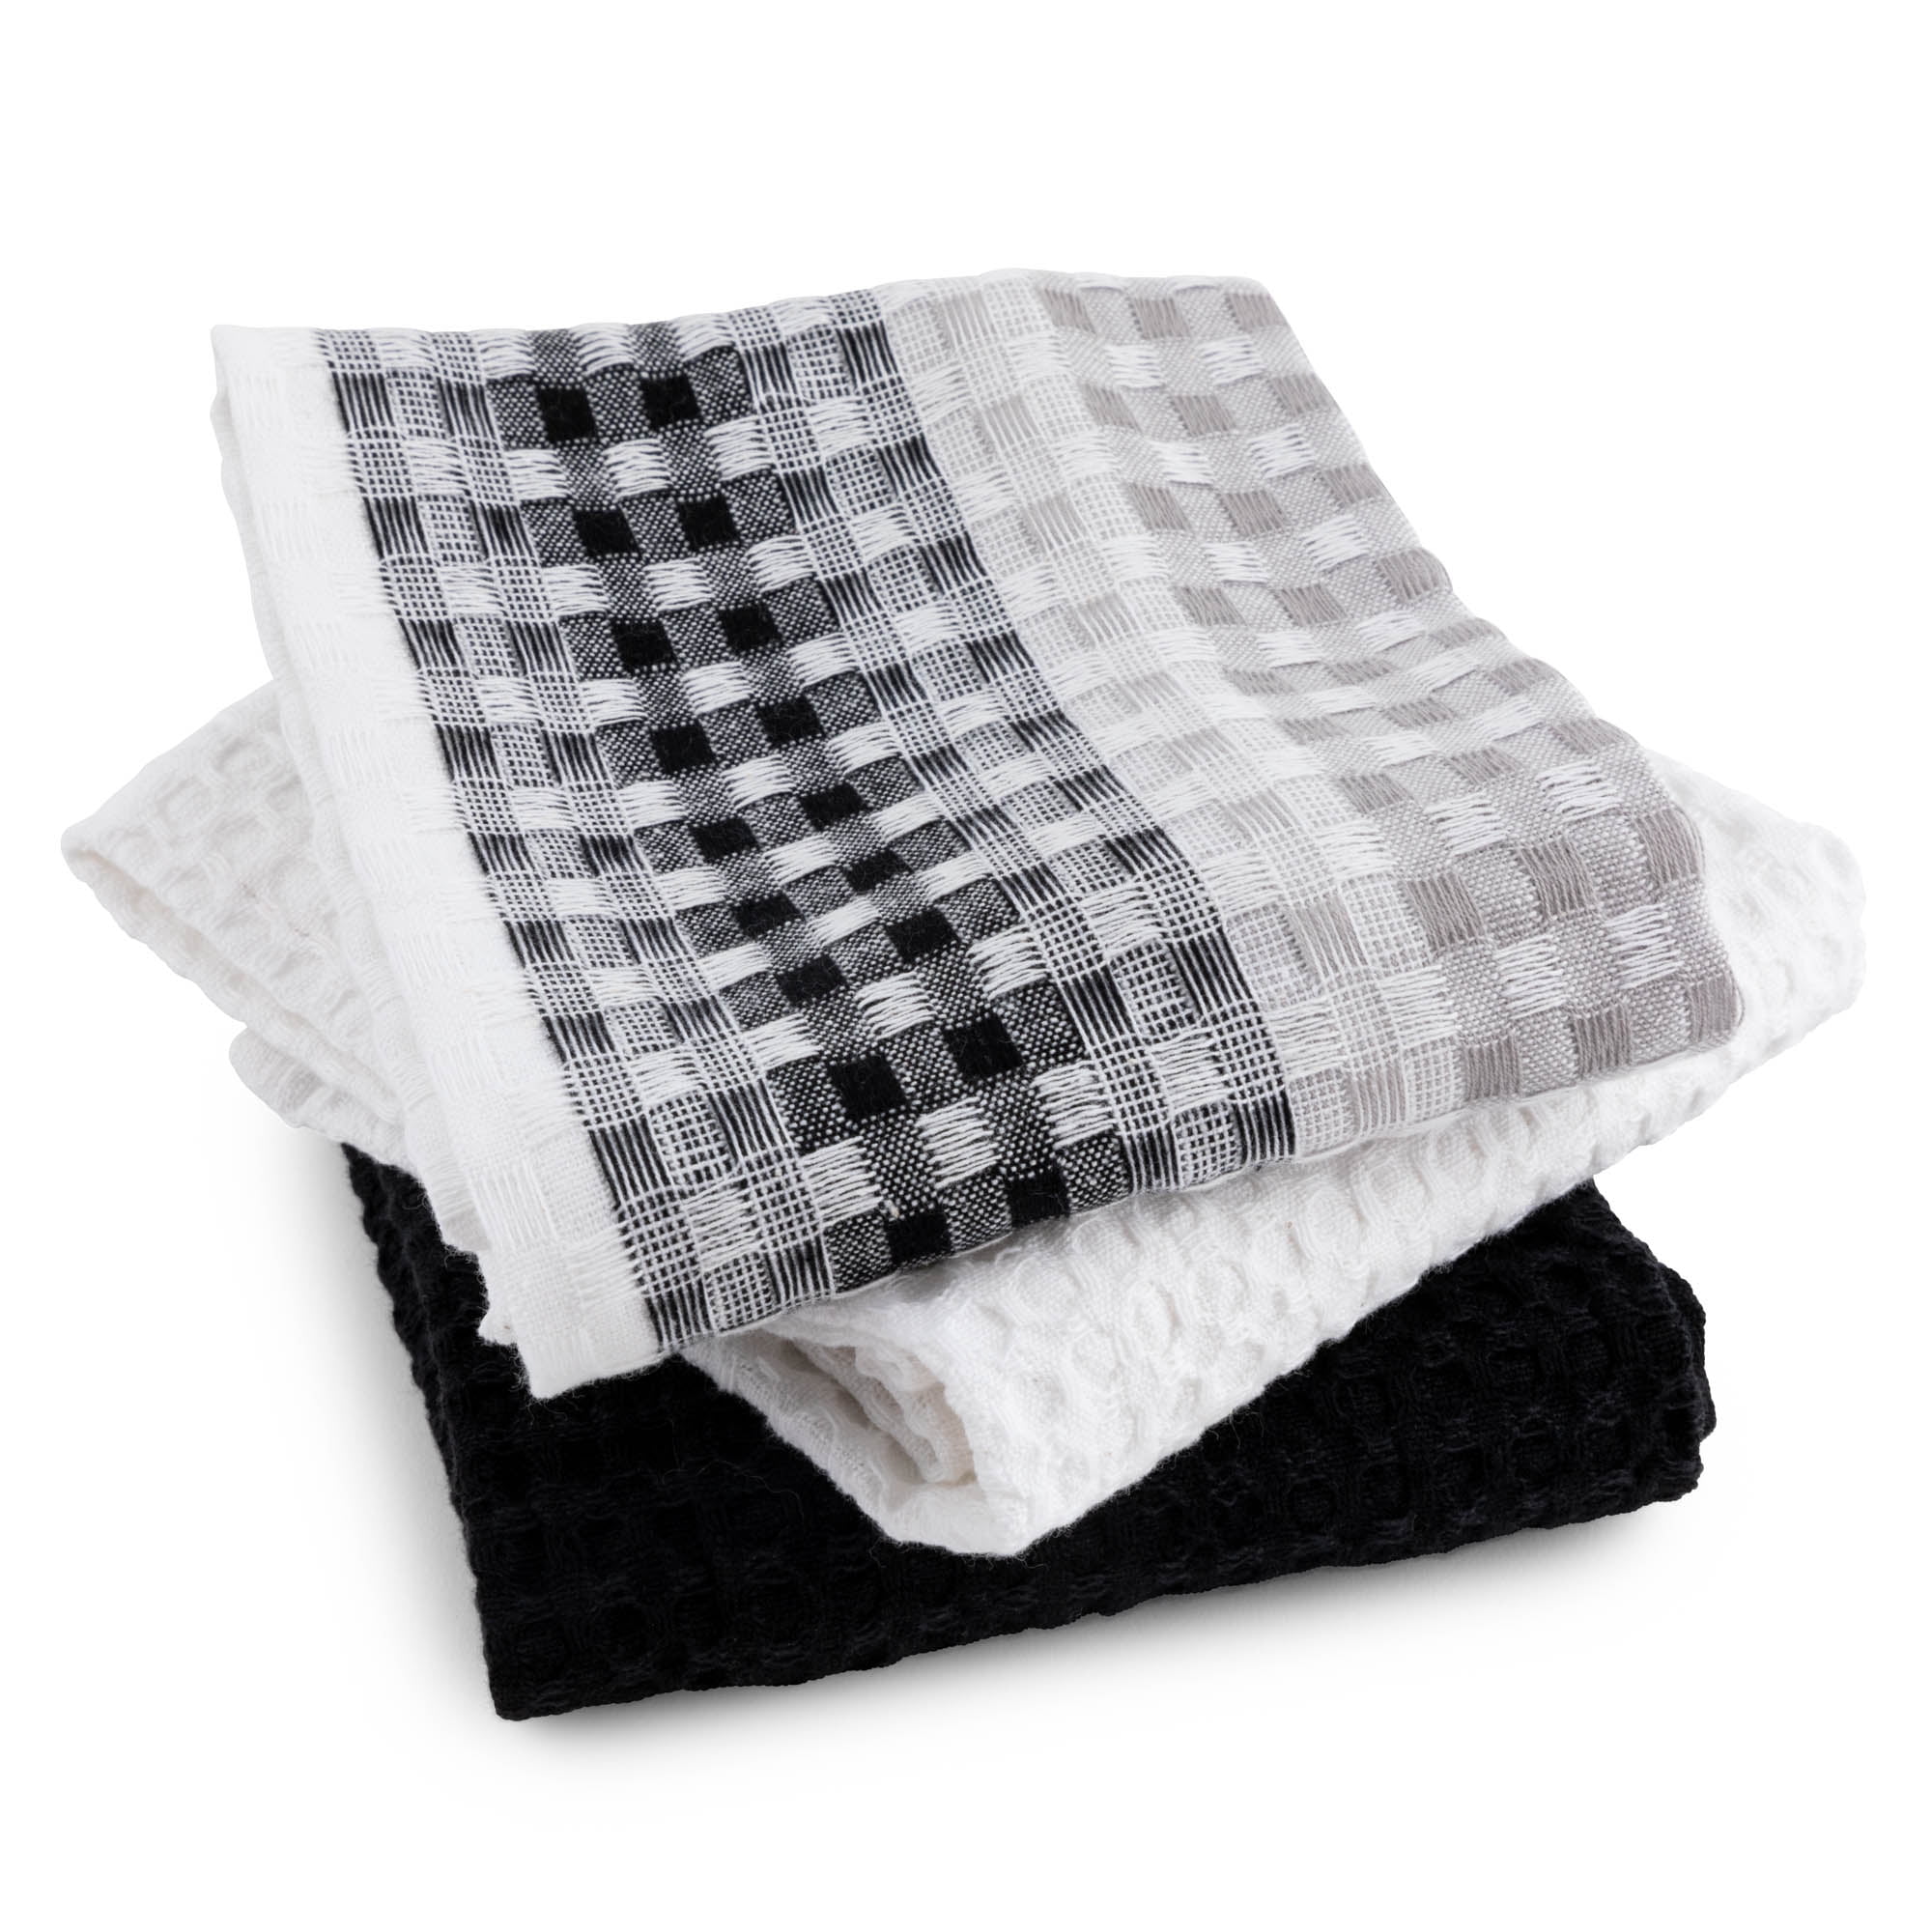 5PK New KITCHEN CONCEPT Cotton Terry Kitchen Towels Black White Striped  Assorted